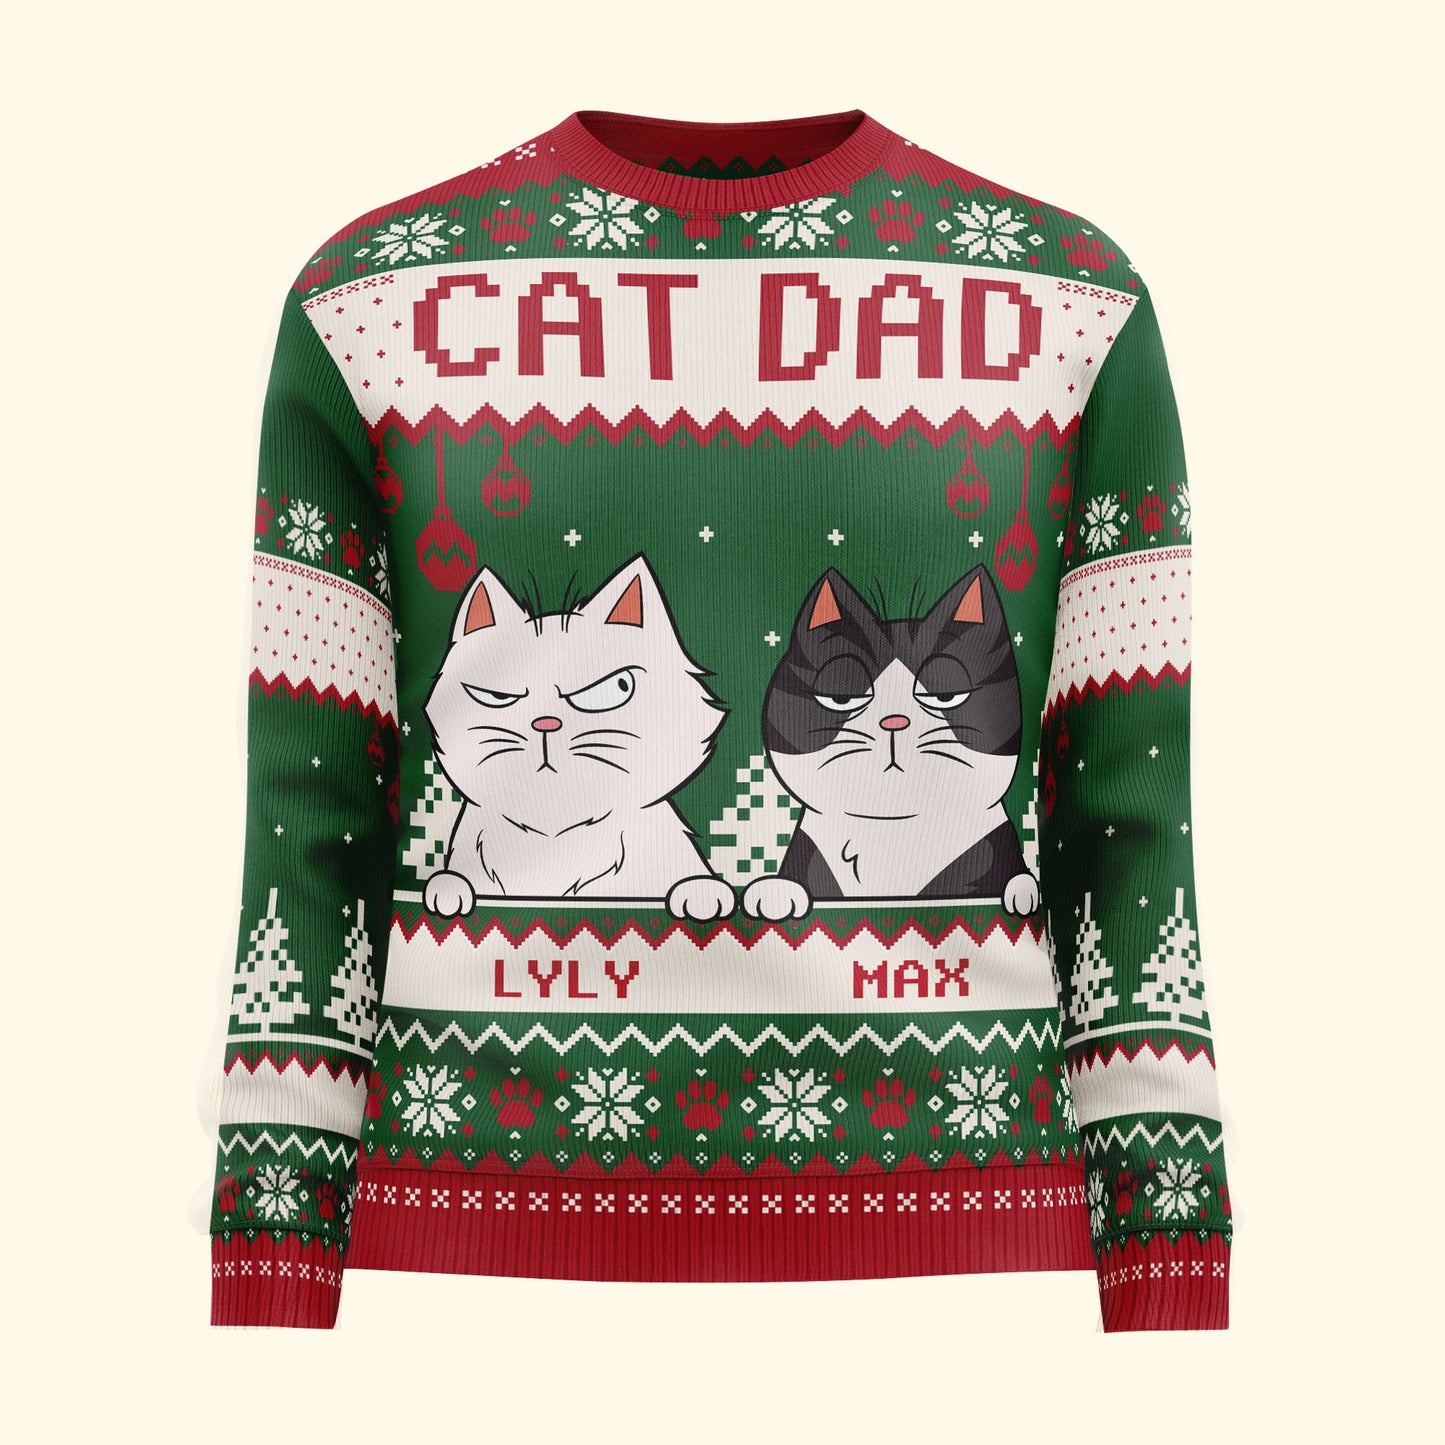 Best Cat Dad Ever - Personalized Ugly Sweater